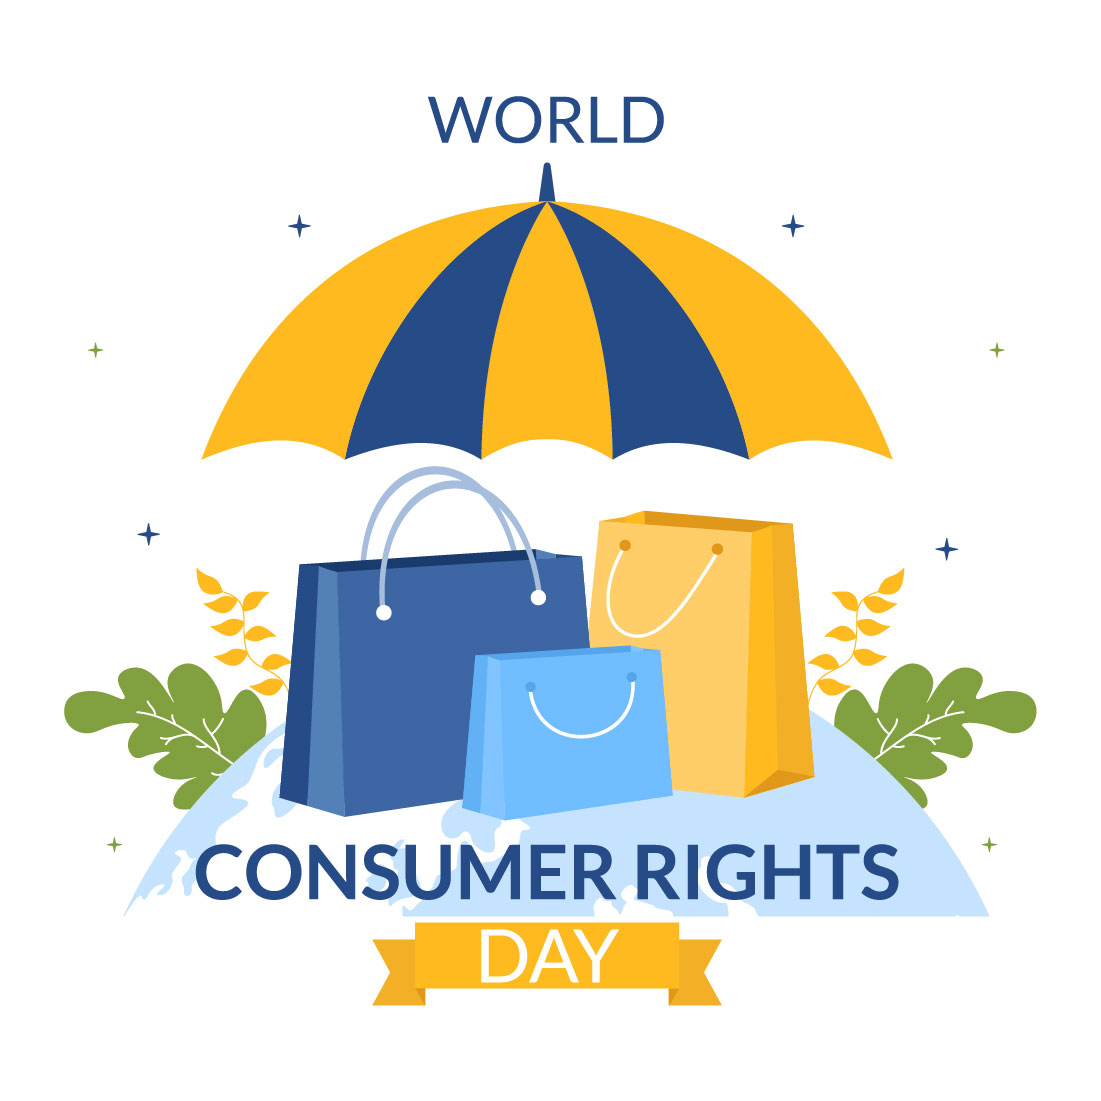 World Consumer Rights Day Illustration cover image.